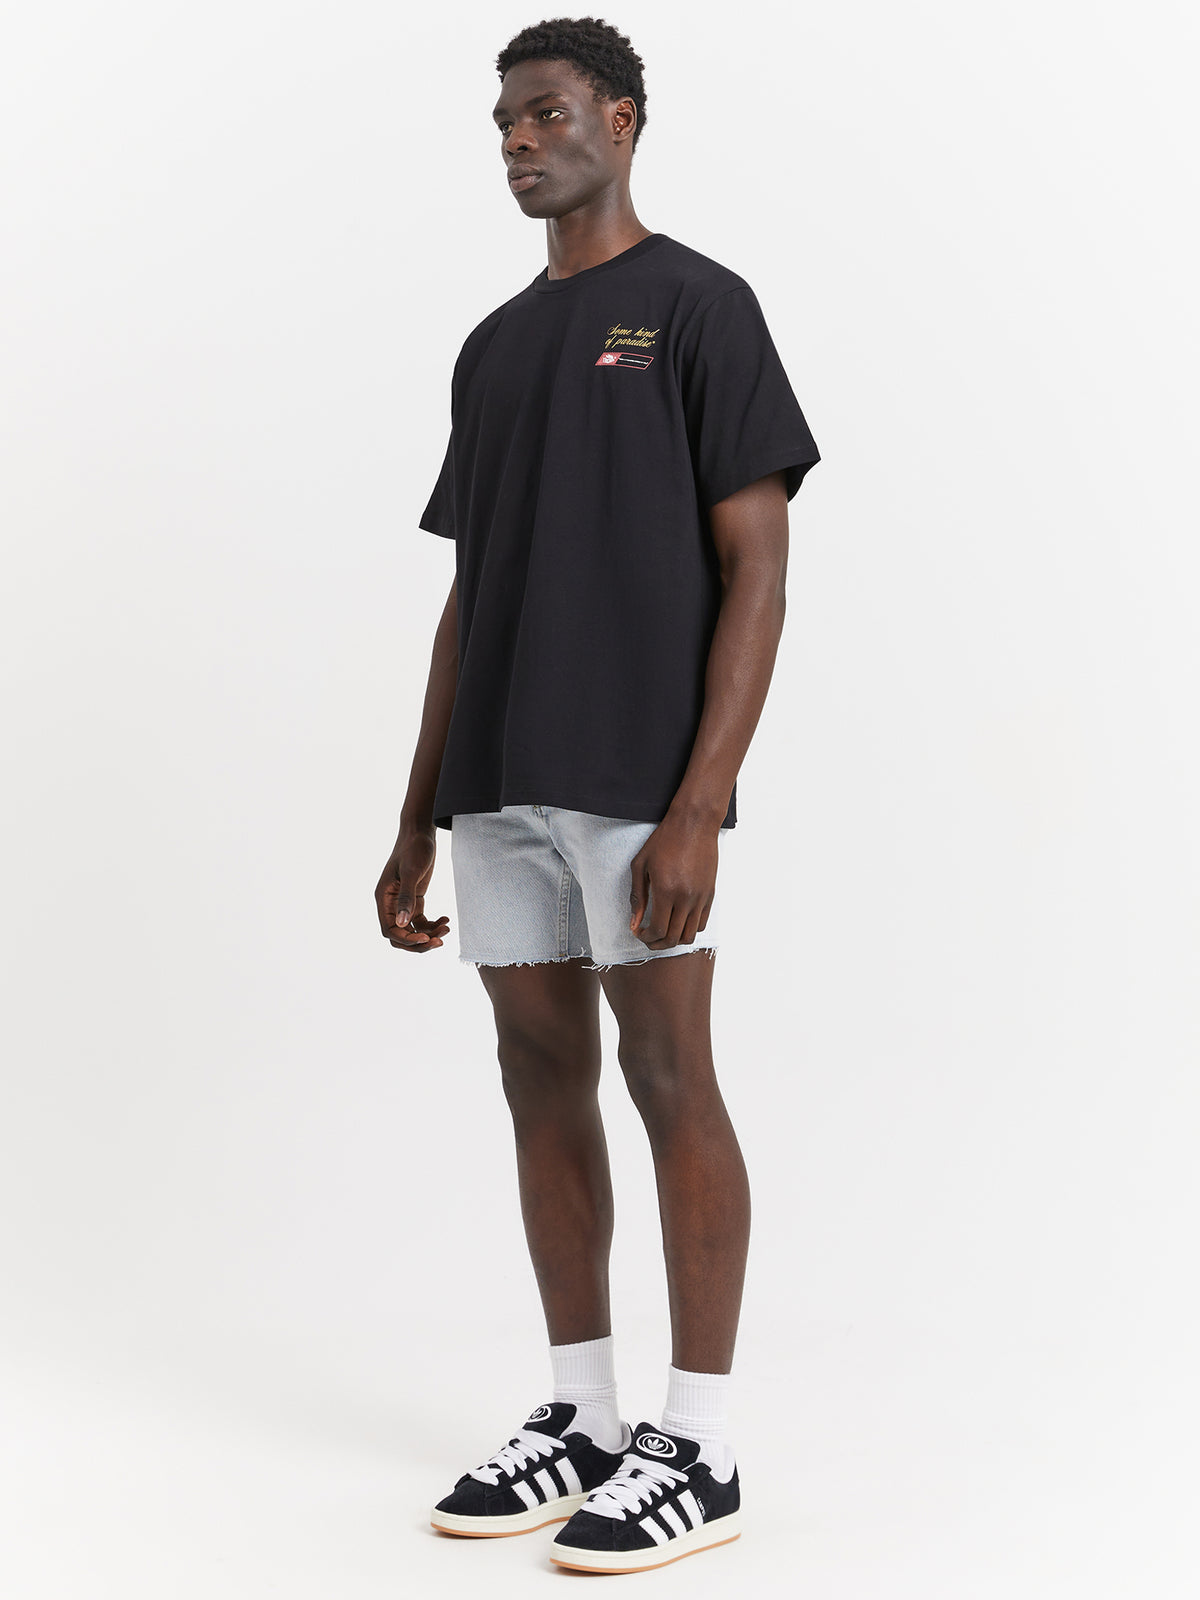 Superior Merch Fit T-Shirt in Black